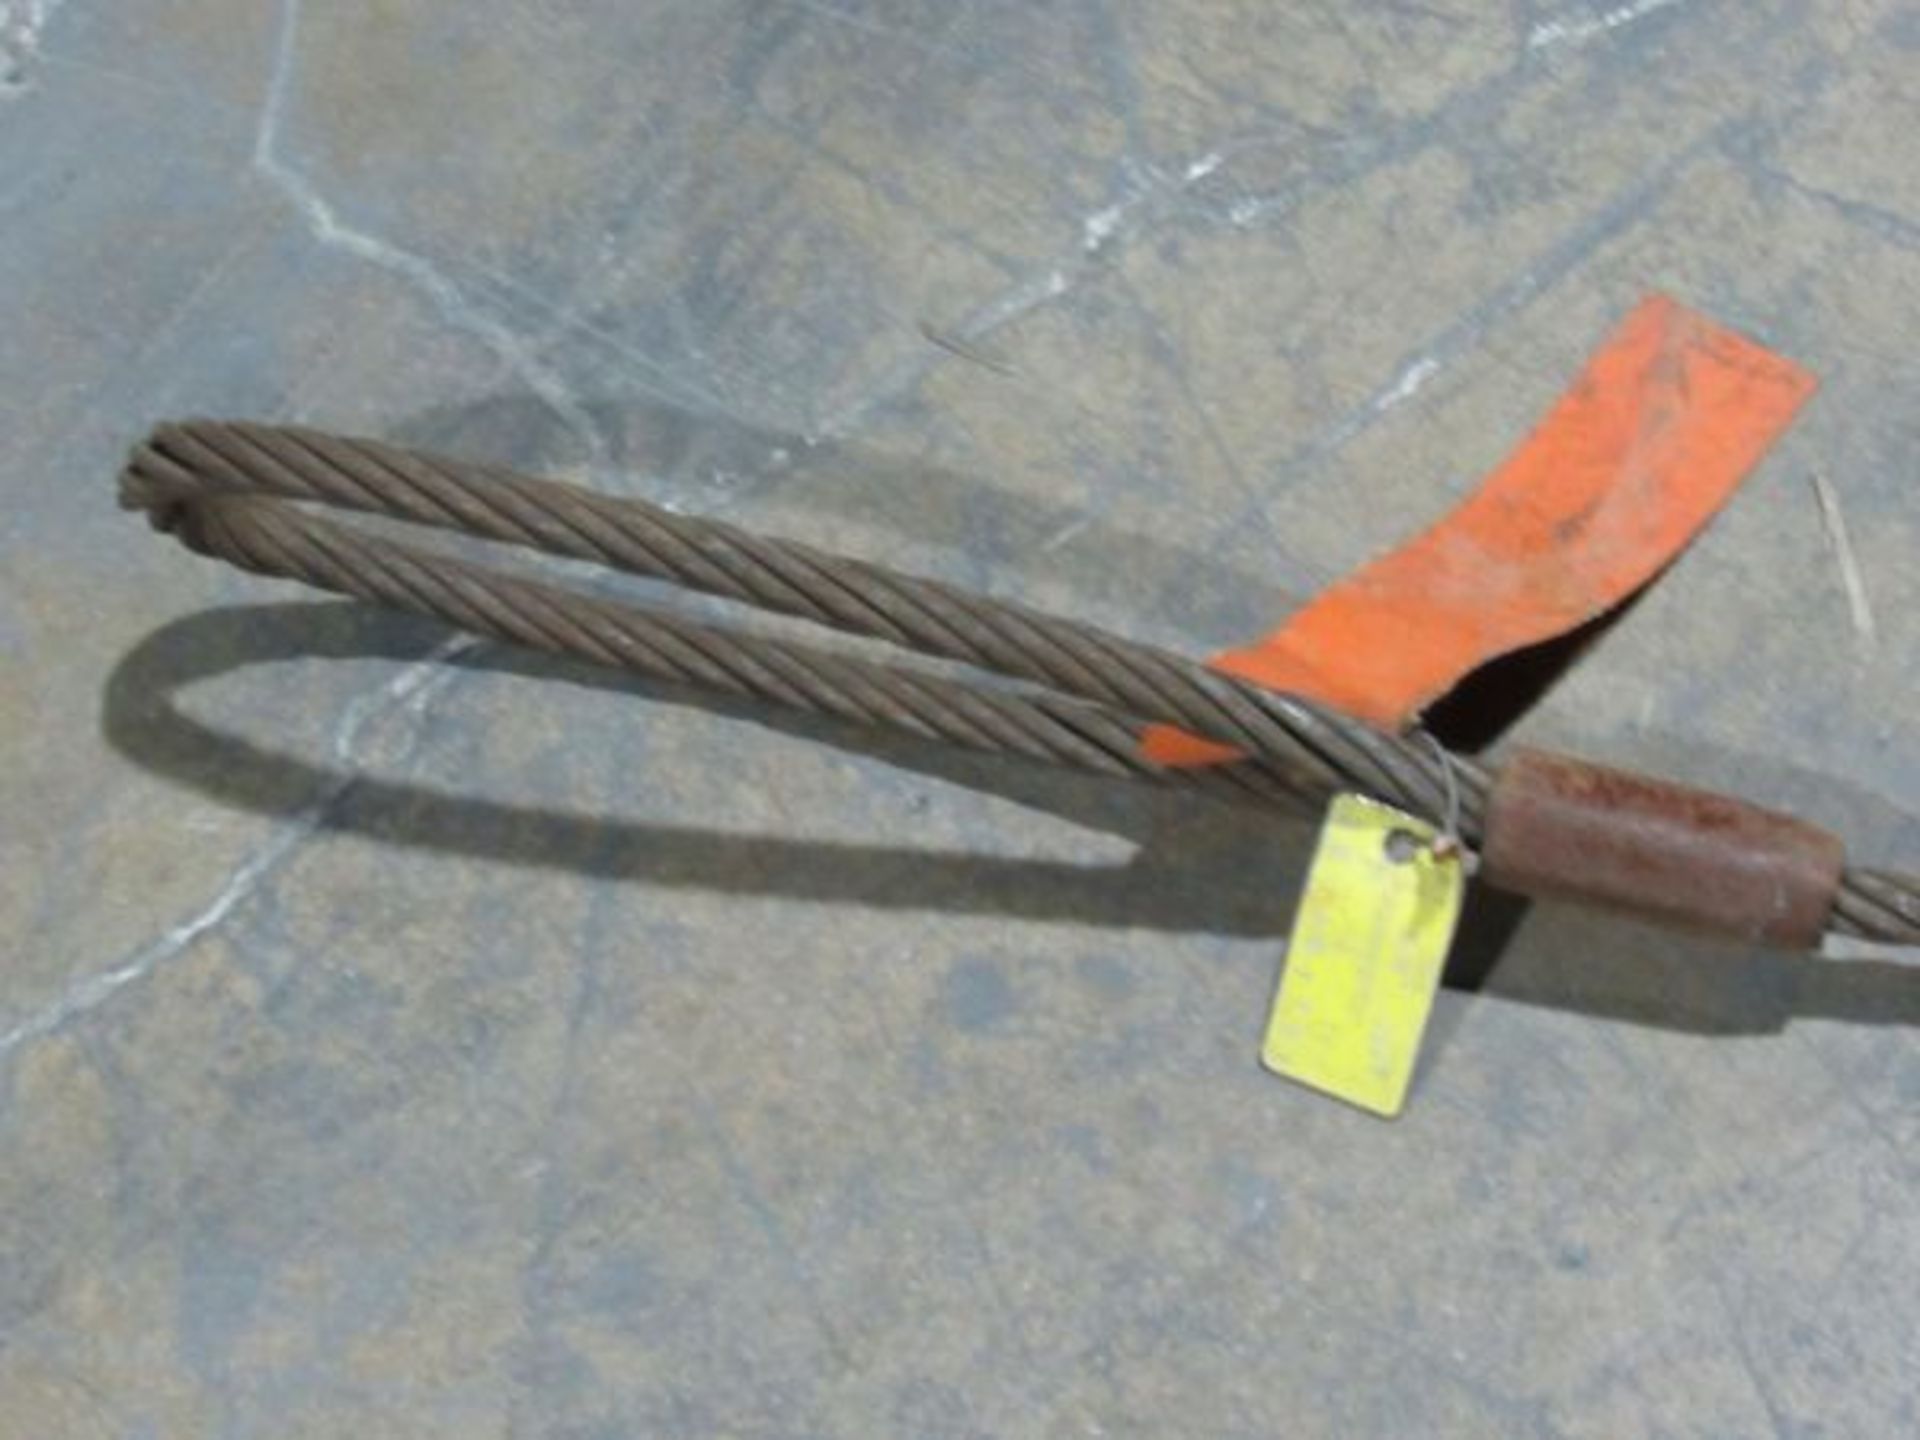 Assorted Braided Steel Lifting Slings- MFR - Total Tool, Lindi Sling Sizes Range From 3/8" to 1" - Image 16 of 20